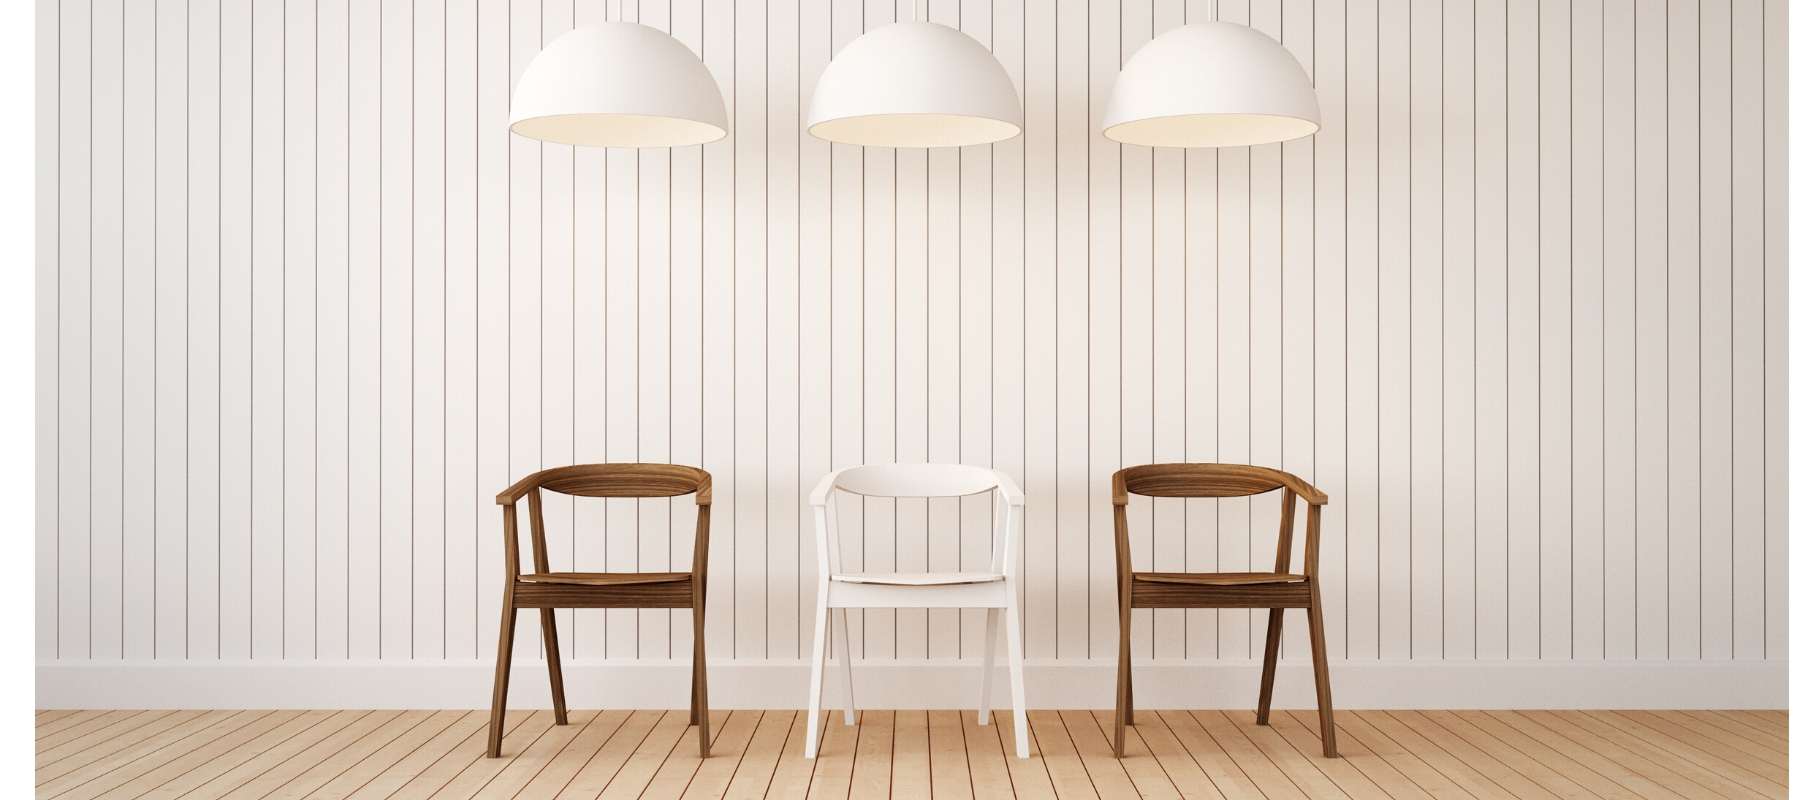 Wooden dining chairs with three white kitchen pendant lights